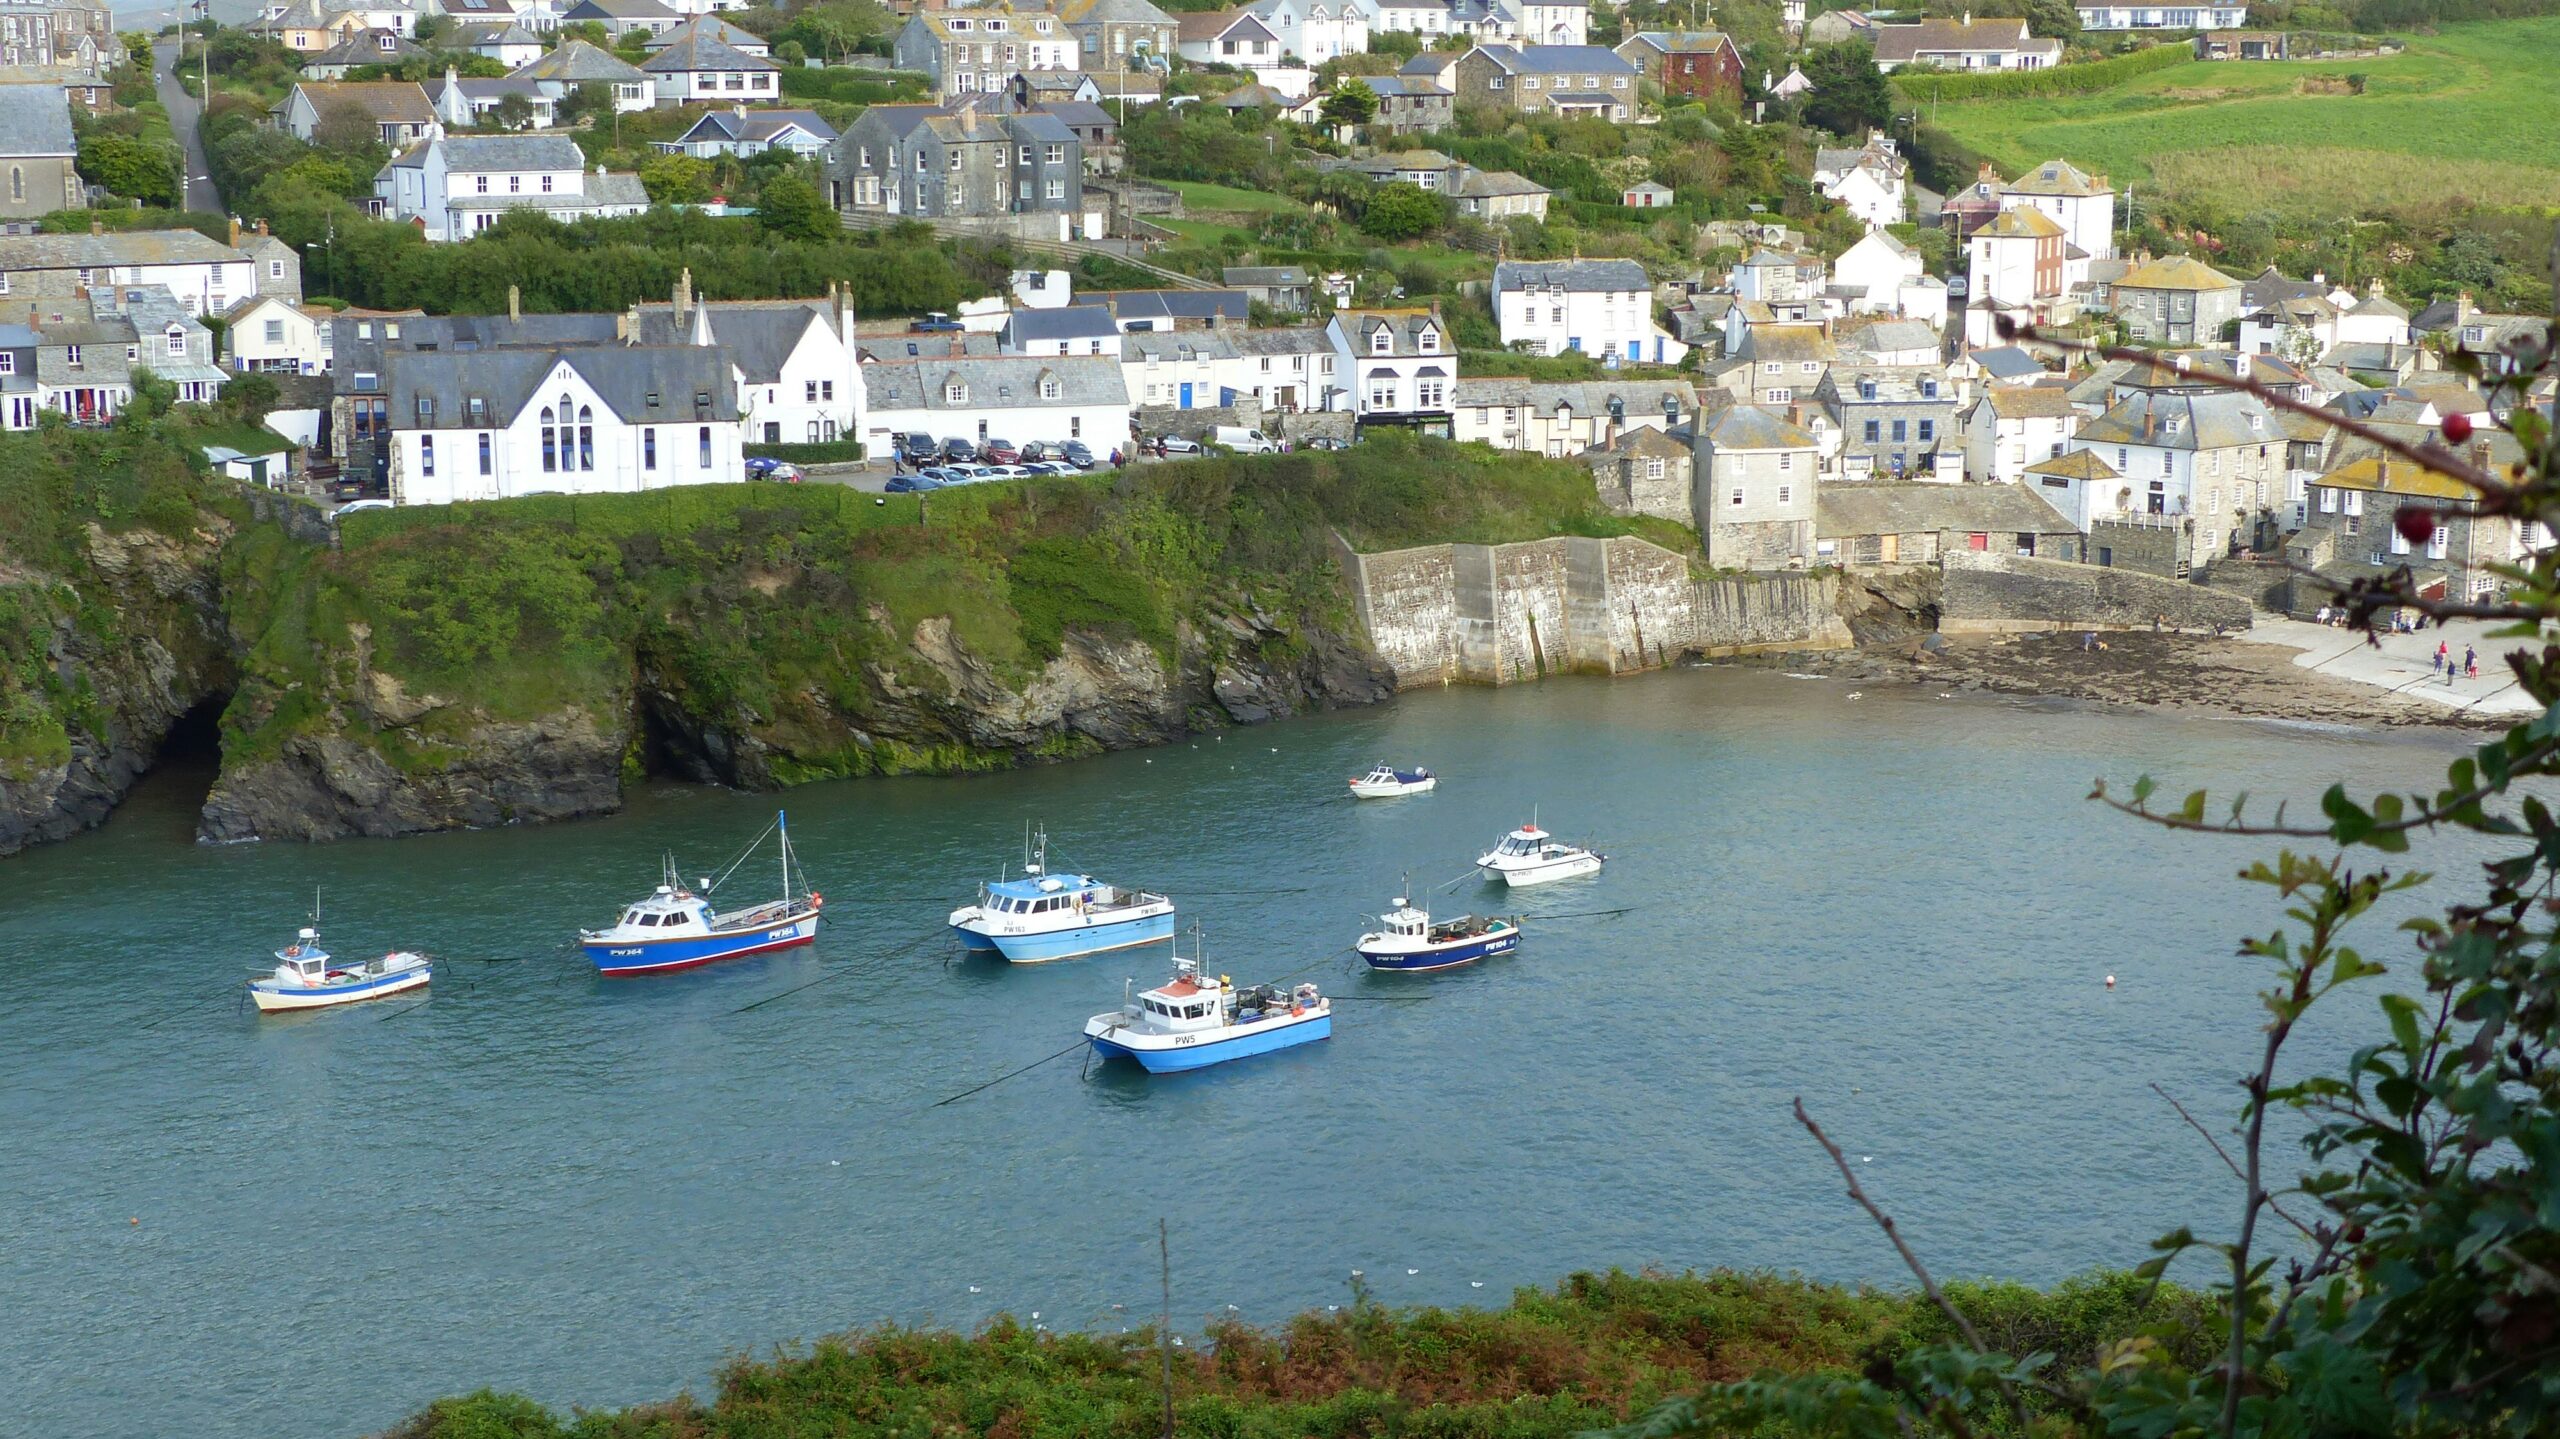 The Golden Lion Pub is a popular place in town and one of the filming locations for the show “Doc Martin”.
Pictured: the coastline of Port Isaac